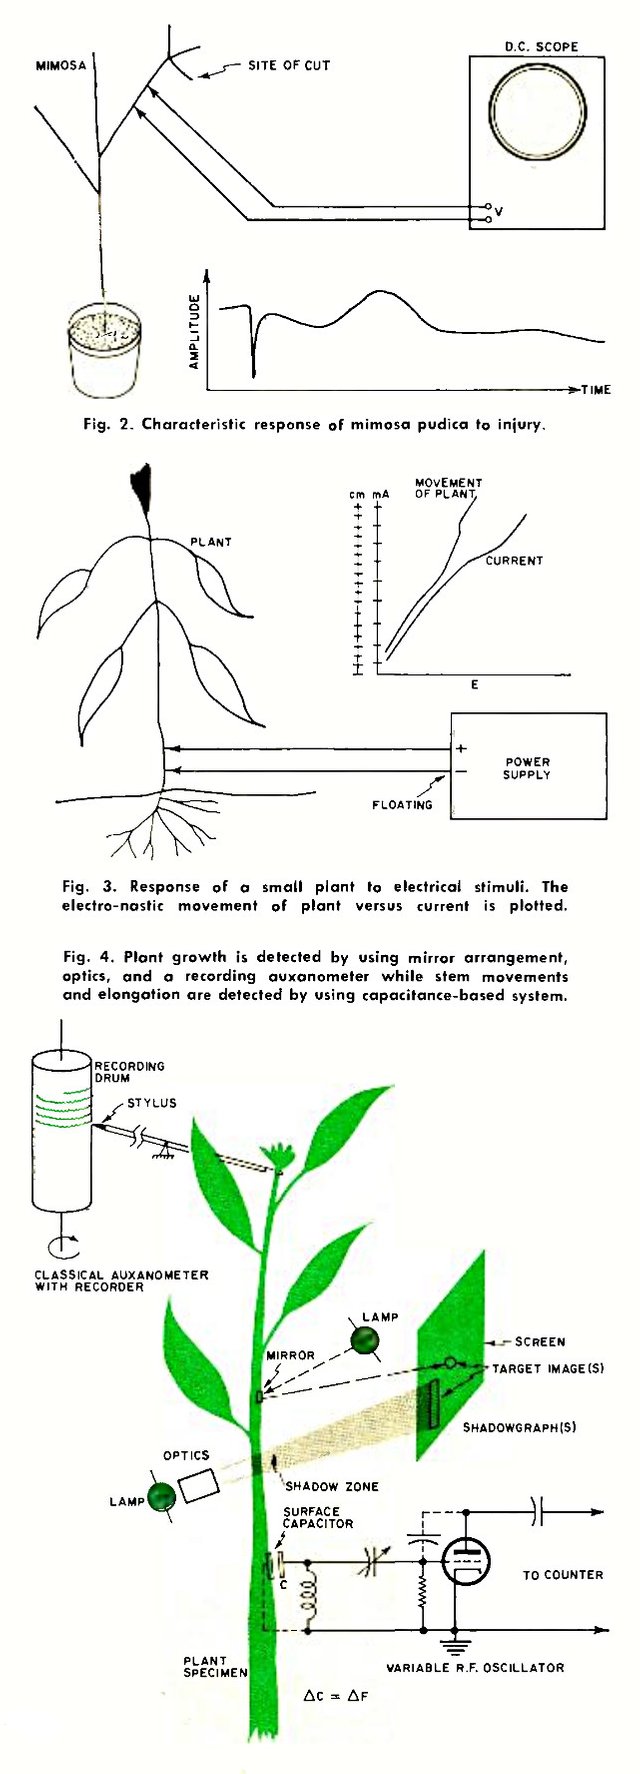 Fig. 2. Characteristic response of mimosa pudica to injury. (Diagram of plant, site of cut, and d.c. scope lines) :: Fig. 3. Response of a small plant to electrical stimuli. The electro-nastic movement of plant versus current is plotted. (Diagram of plant, connected to power supply, chart of current to plant movement) :: Fig. 4. Plant growth is detected by using mirror arrangement optics, and a recording auxanometer while stem movements and elongation are deteicted using capacitance-bases systems